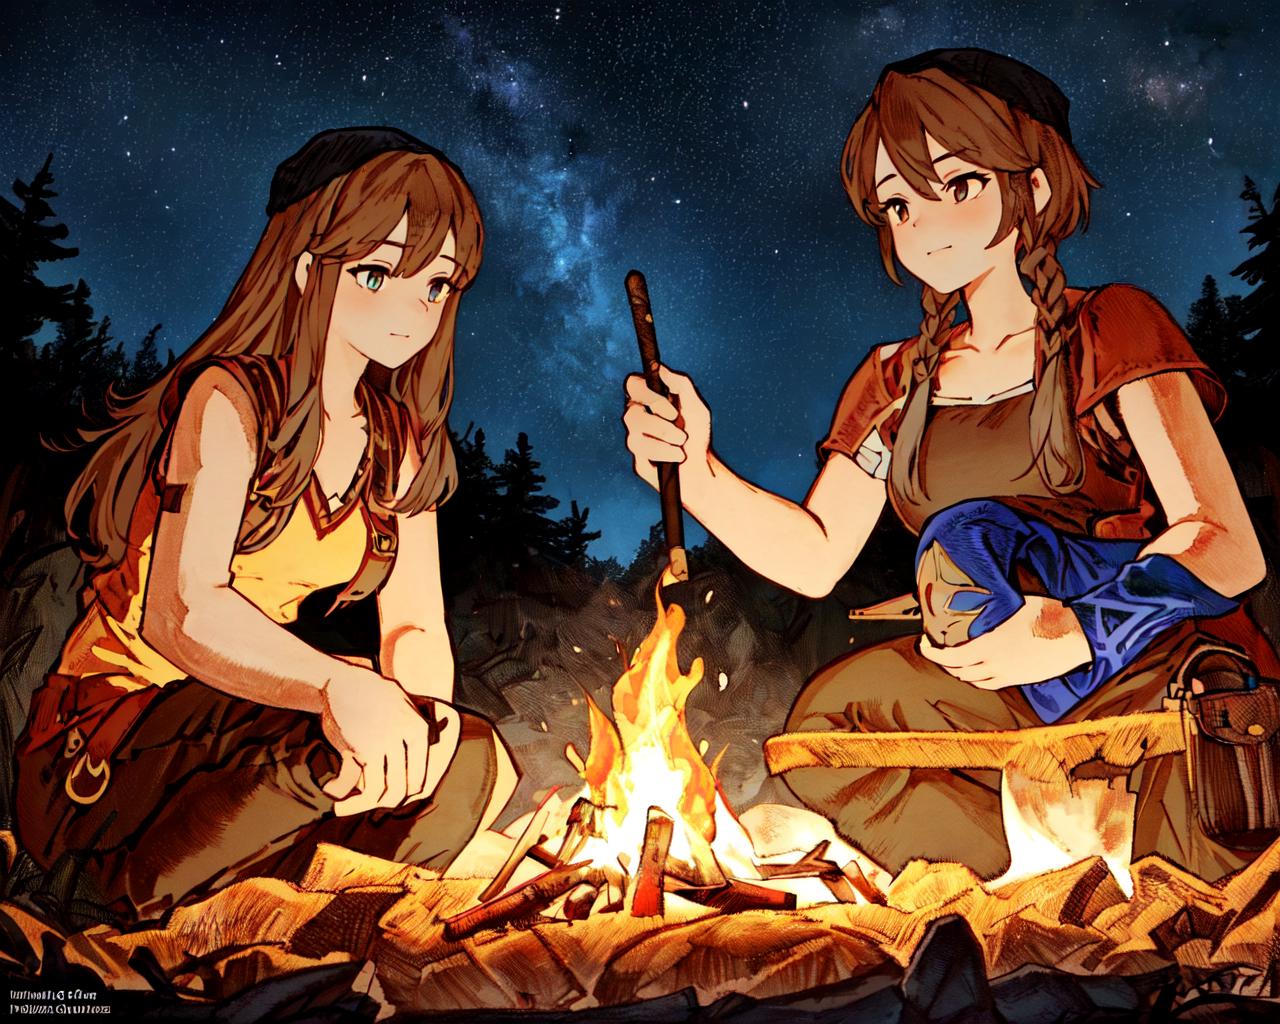 Campfire Cooking in Another World with my Absurd Skill anime series trailer